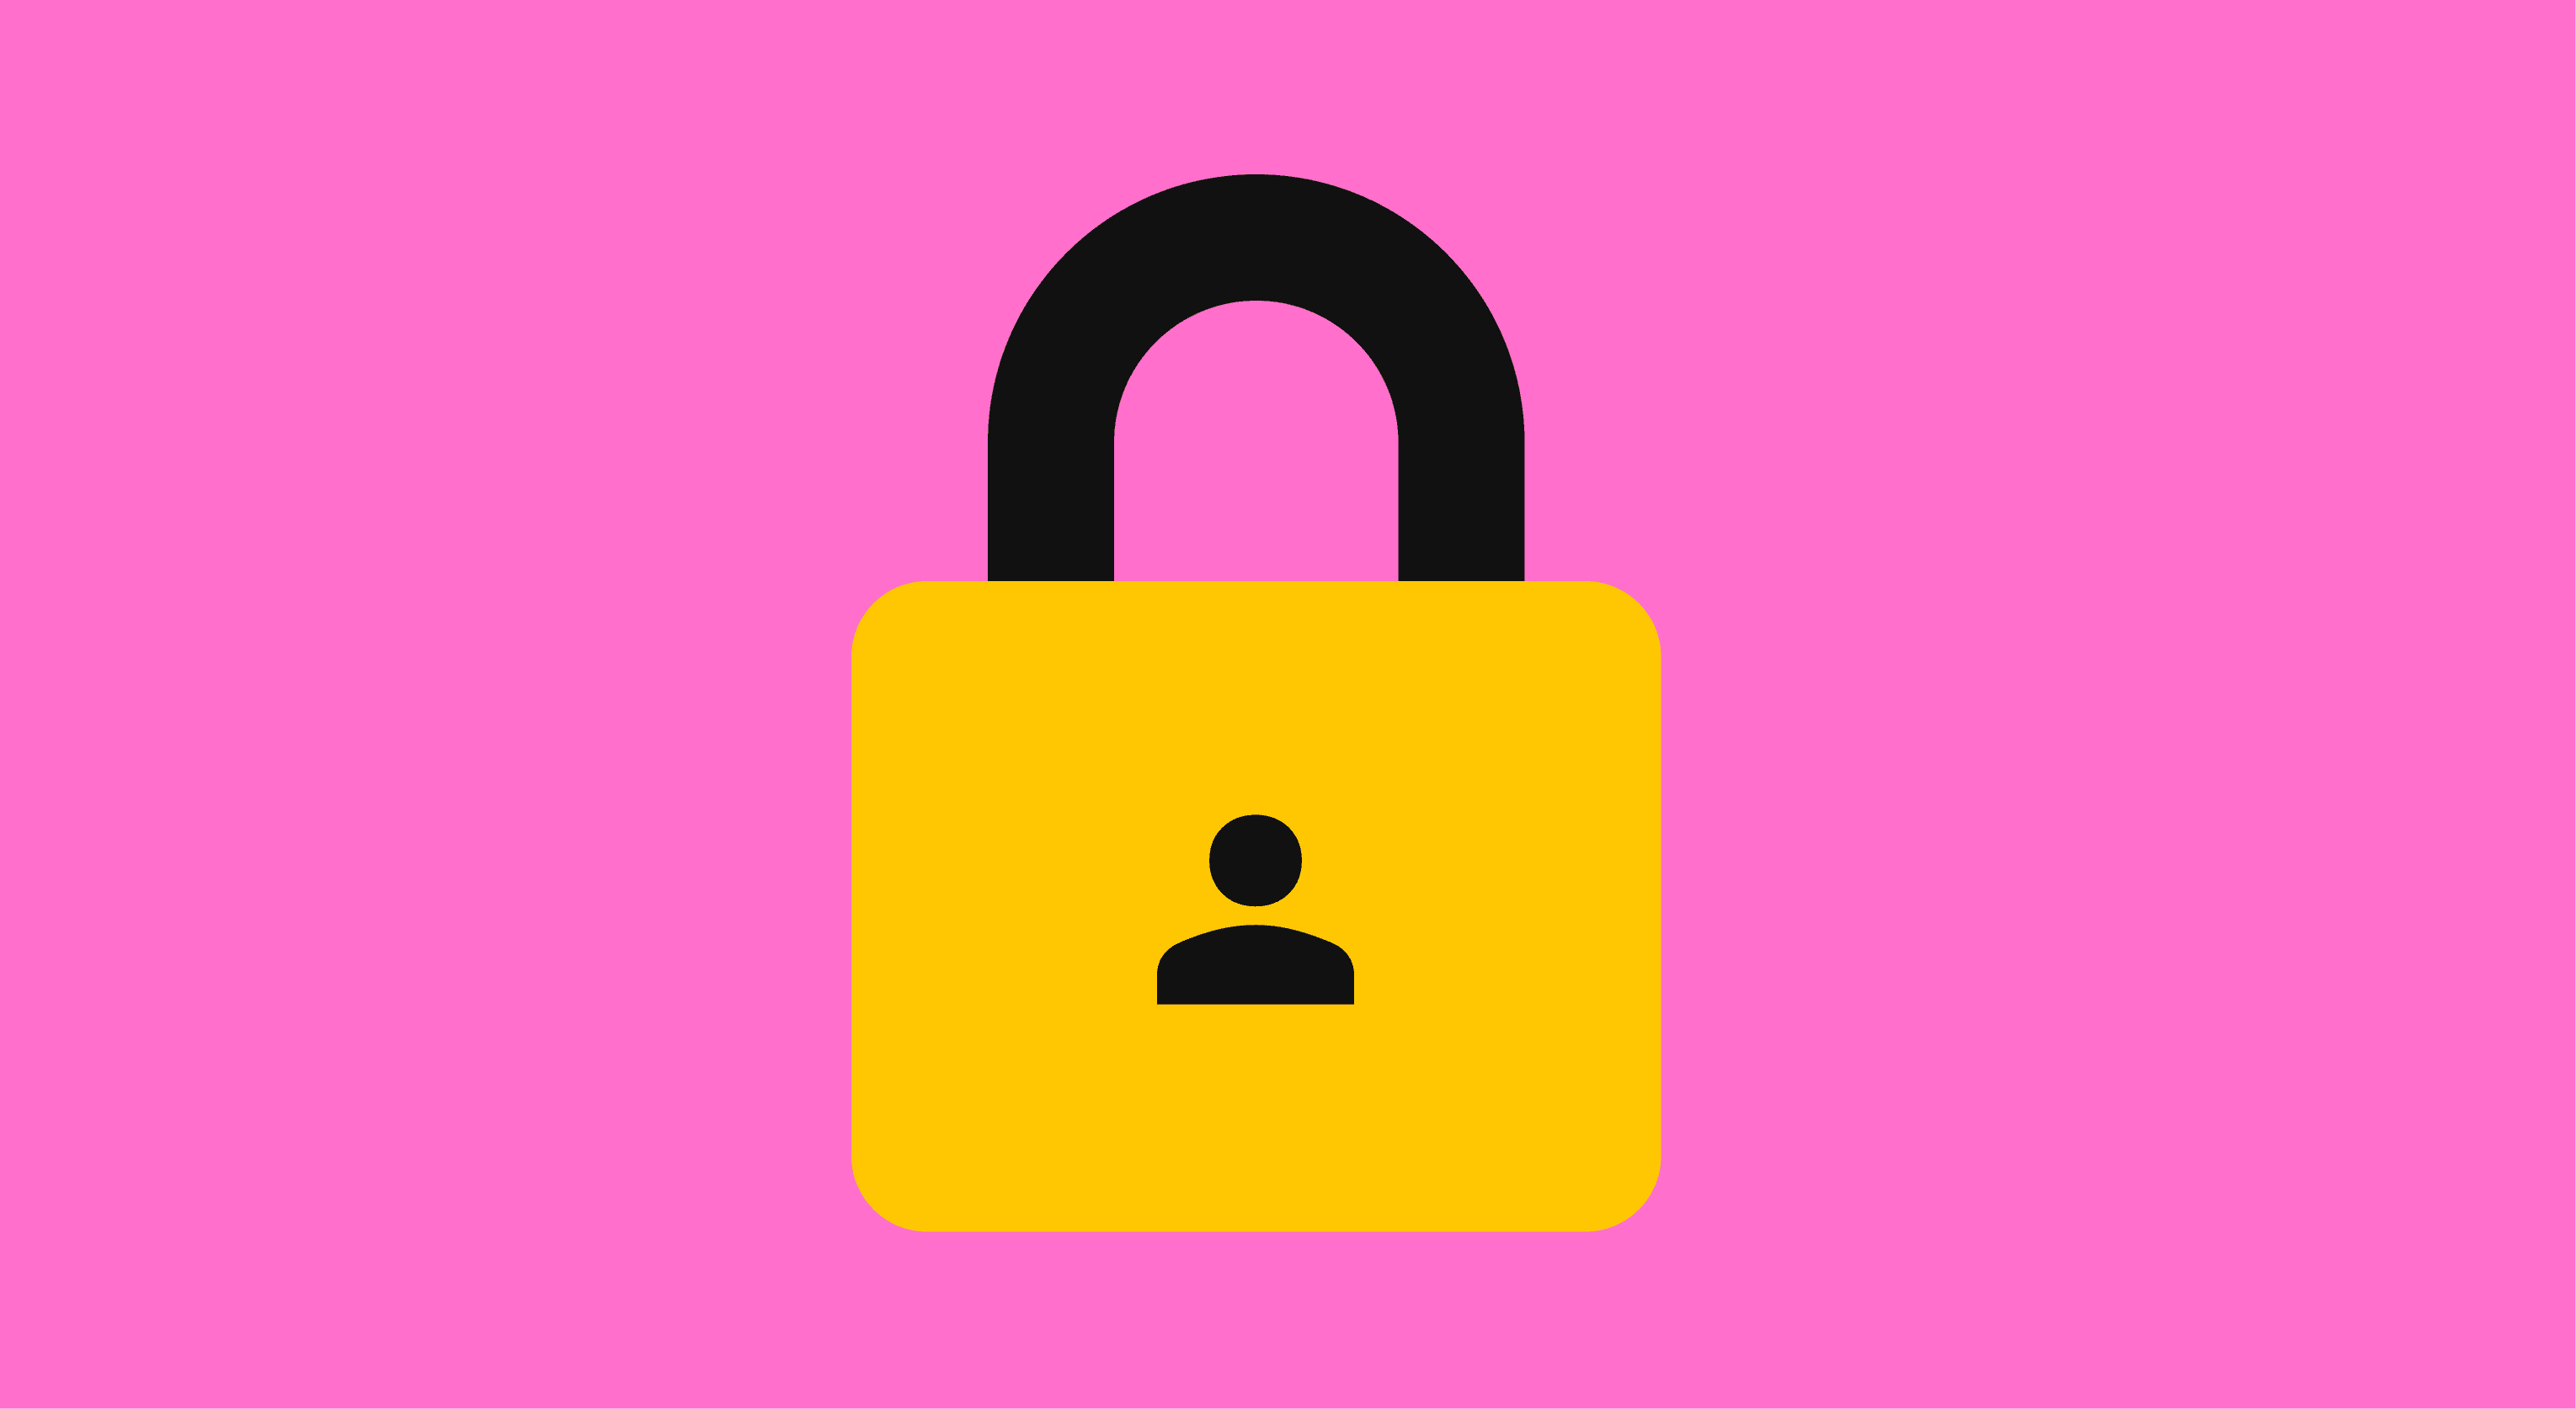 Illustration of padlock with person icon at center.